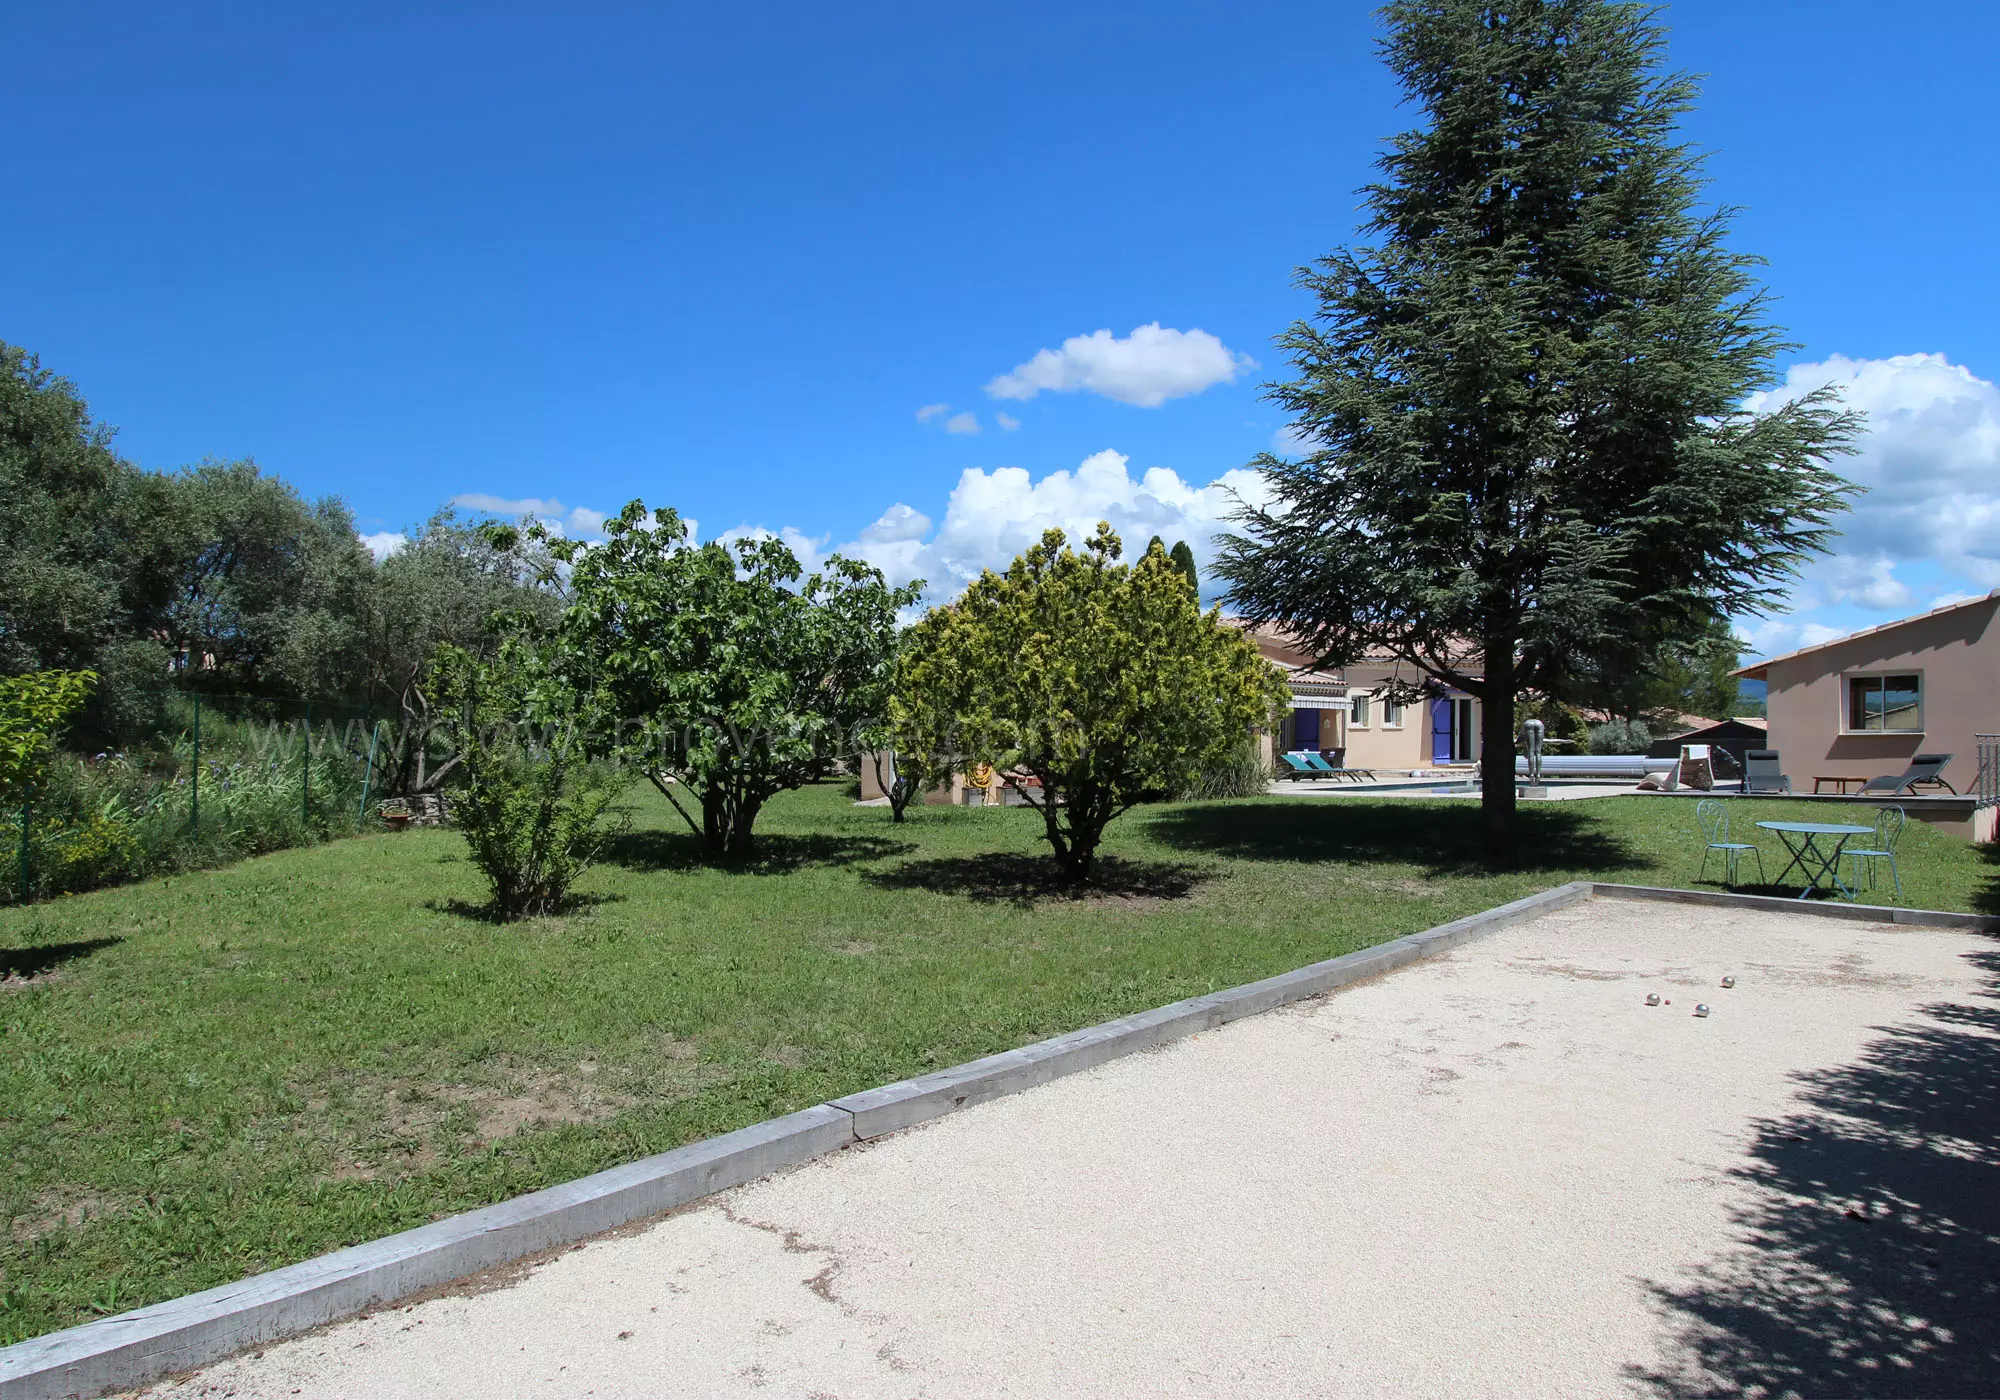 Large garden with trees and petanque area